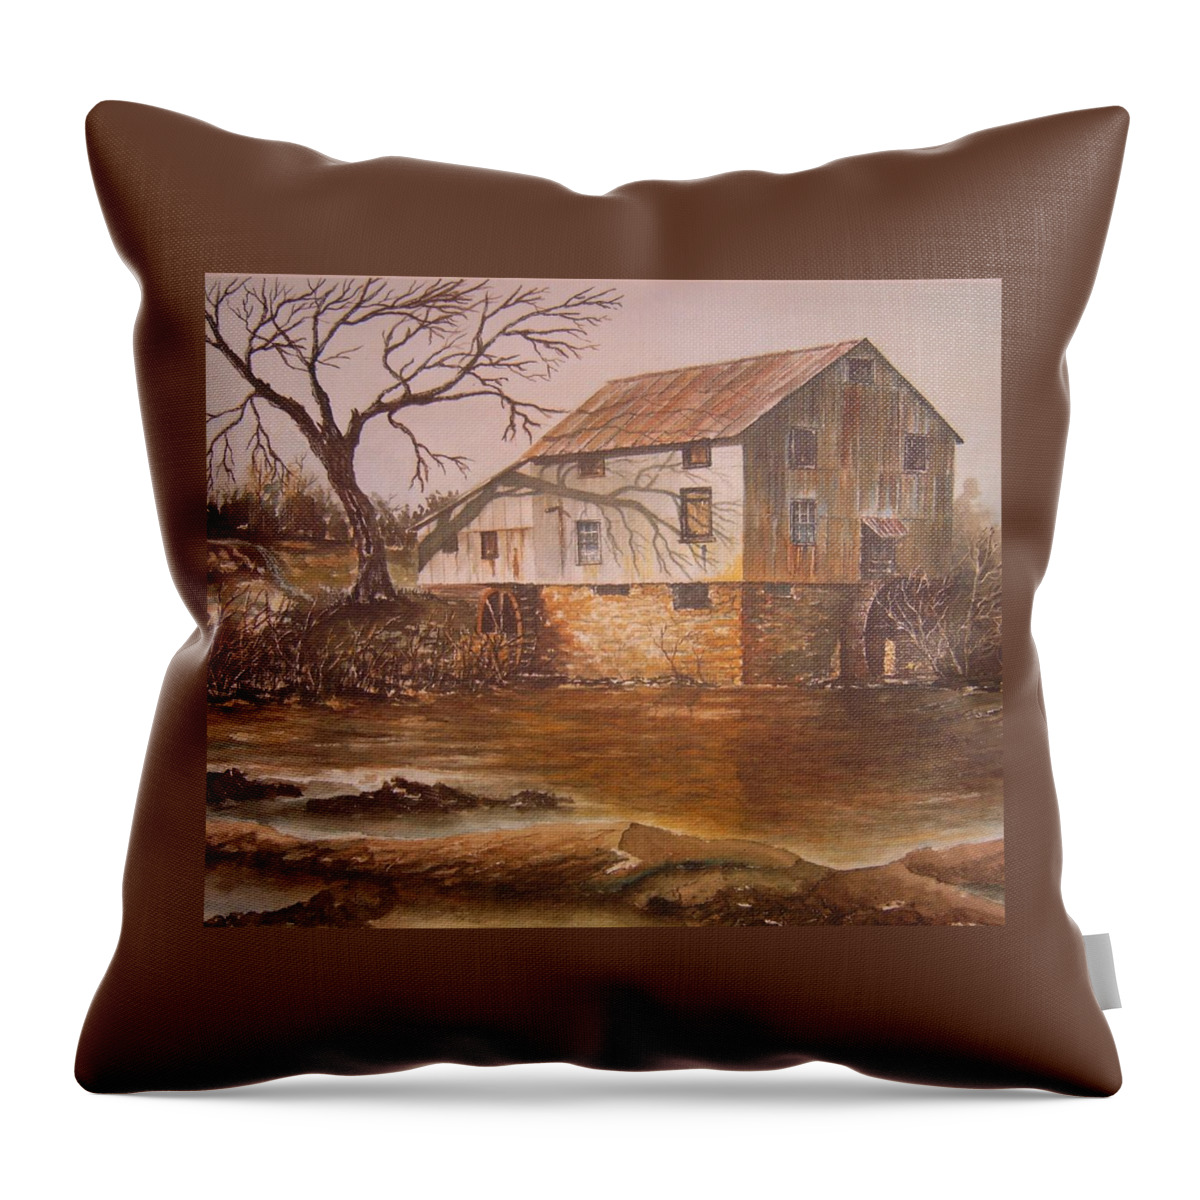 Landscape Throw Pillow featuring the painting Anderson Mill by Ben Kiger